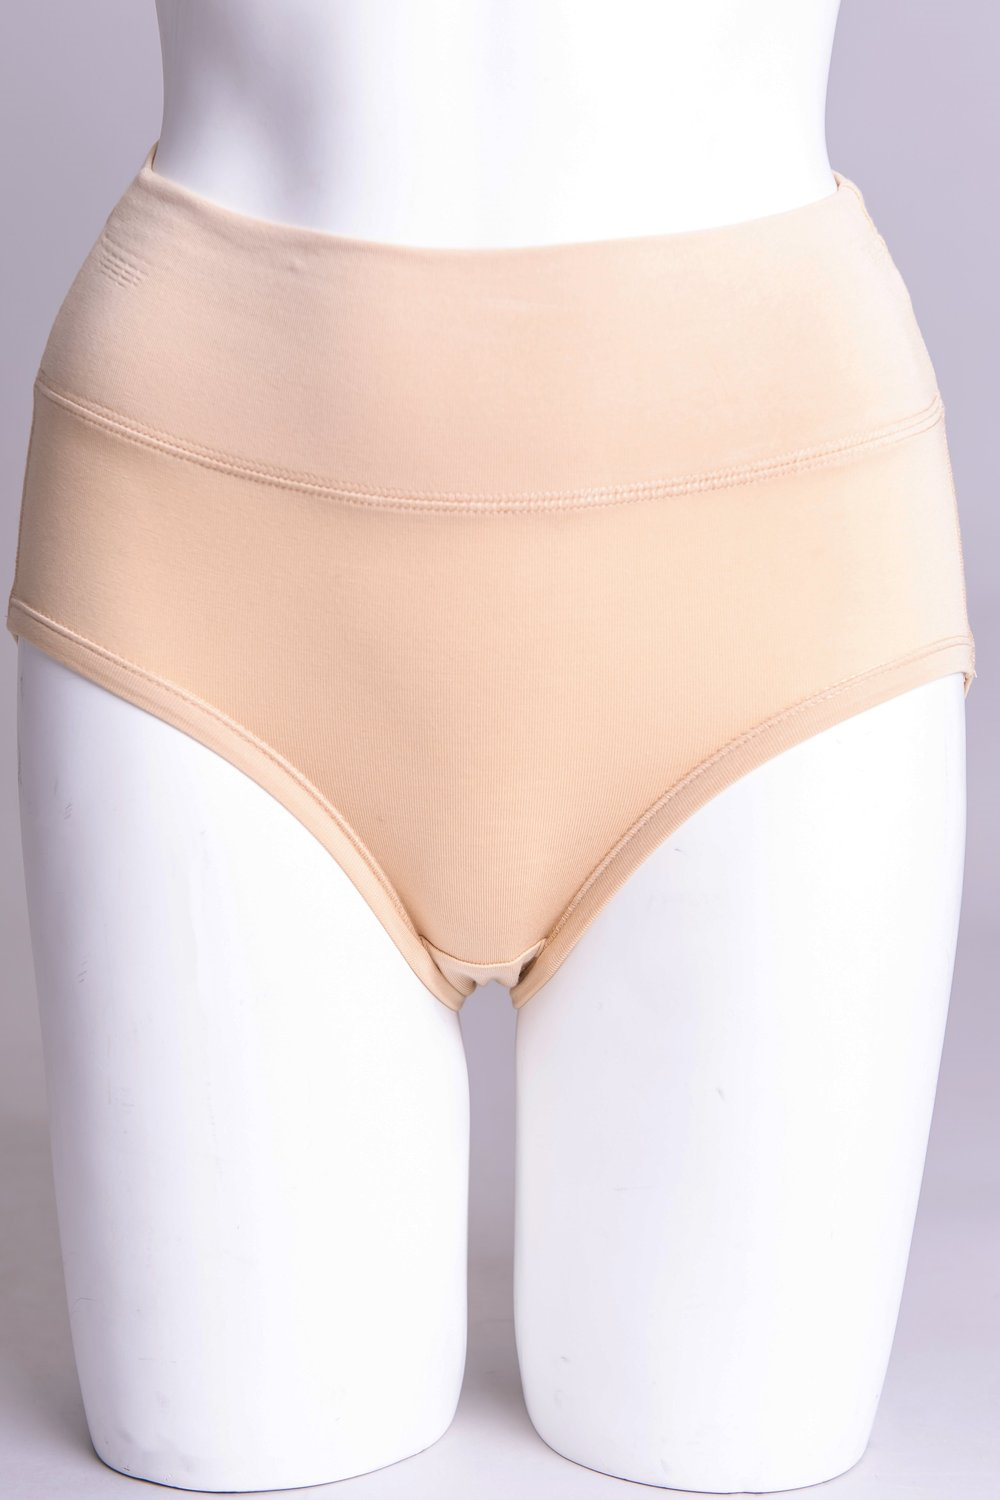   La Gaunche is shaped to be lightly horizontal, tucking snugly under the buttocks. Out of sight, out of mind.    Fabrication: BAMBOO - 95% Bamboo 5% Lycra   Fabrication - BAMBOO MODAL -50% Bamboo 42% Modal 8% Lycra  BLUE SKY $15.00 colour nude